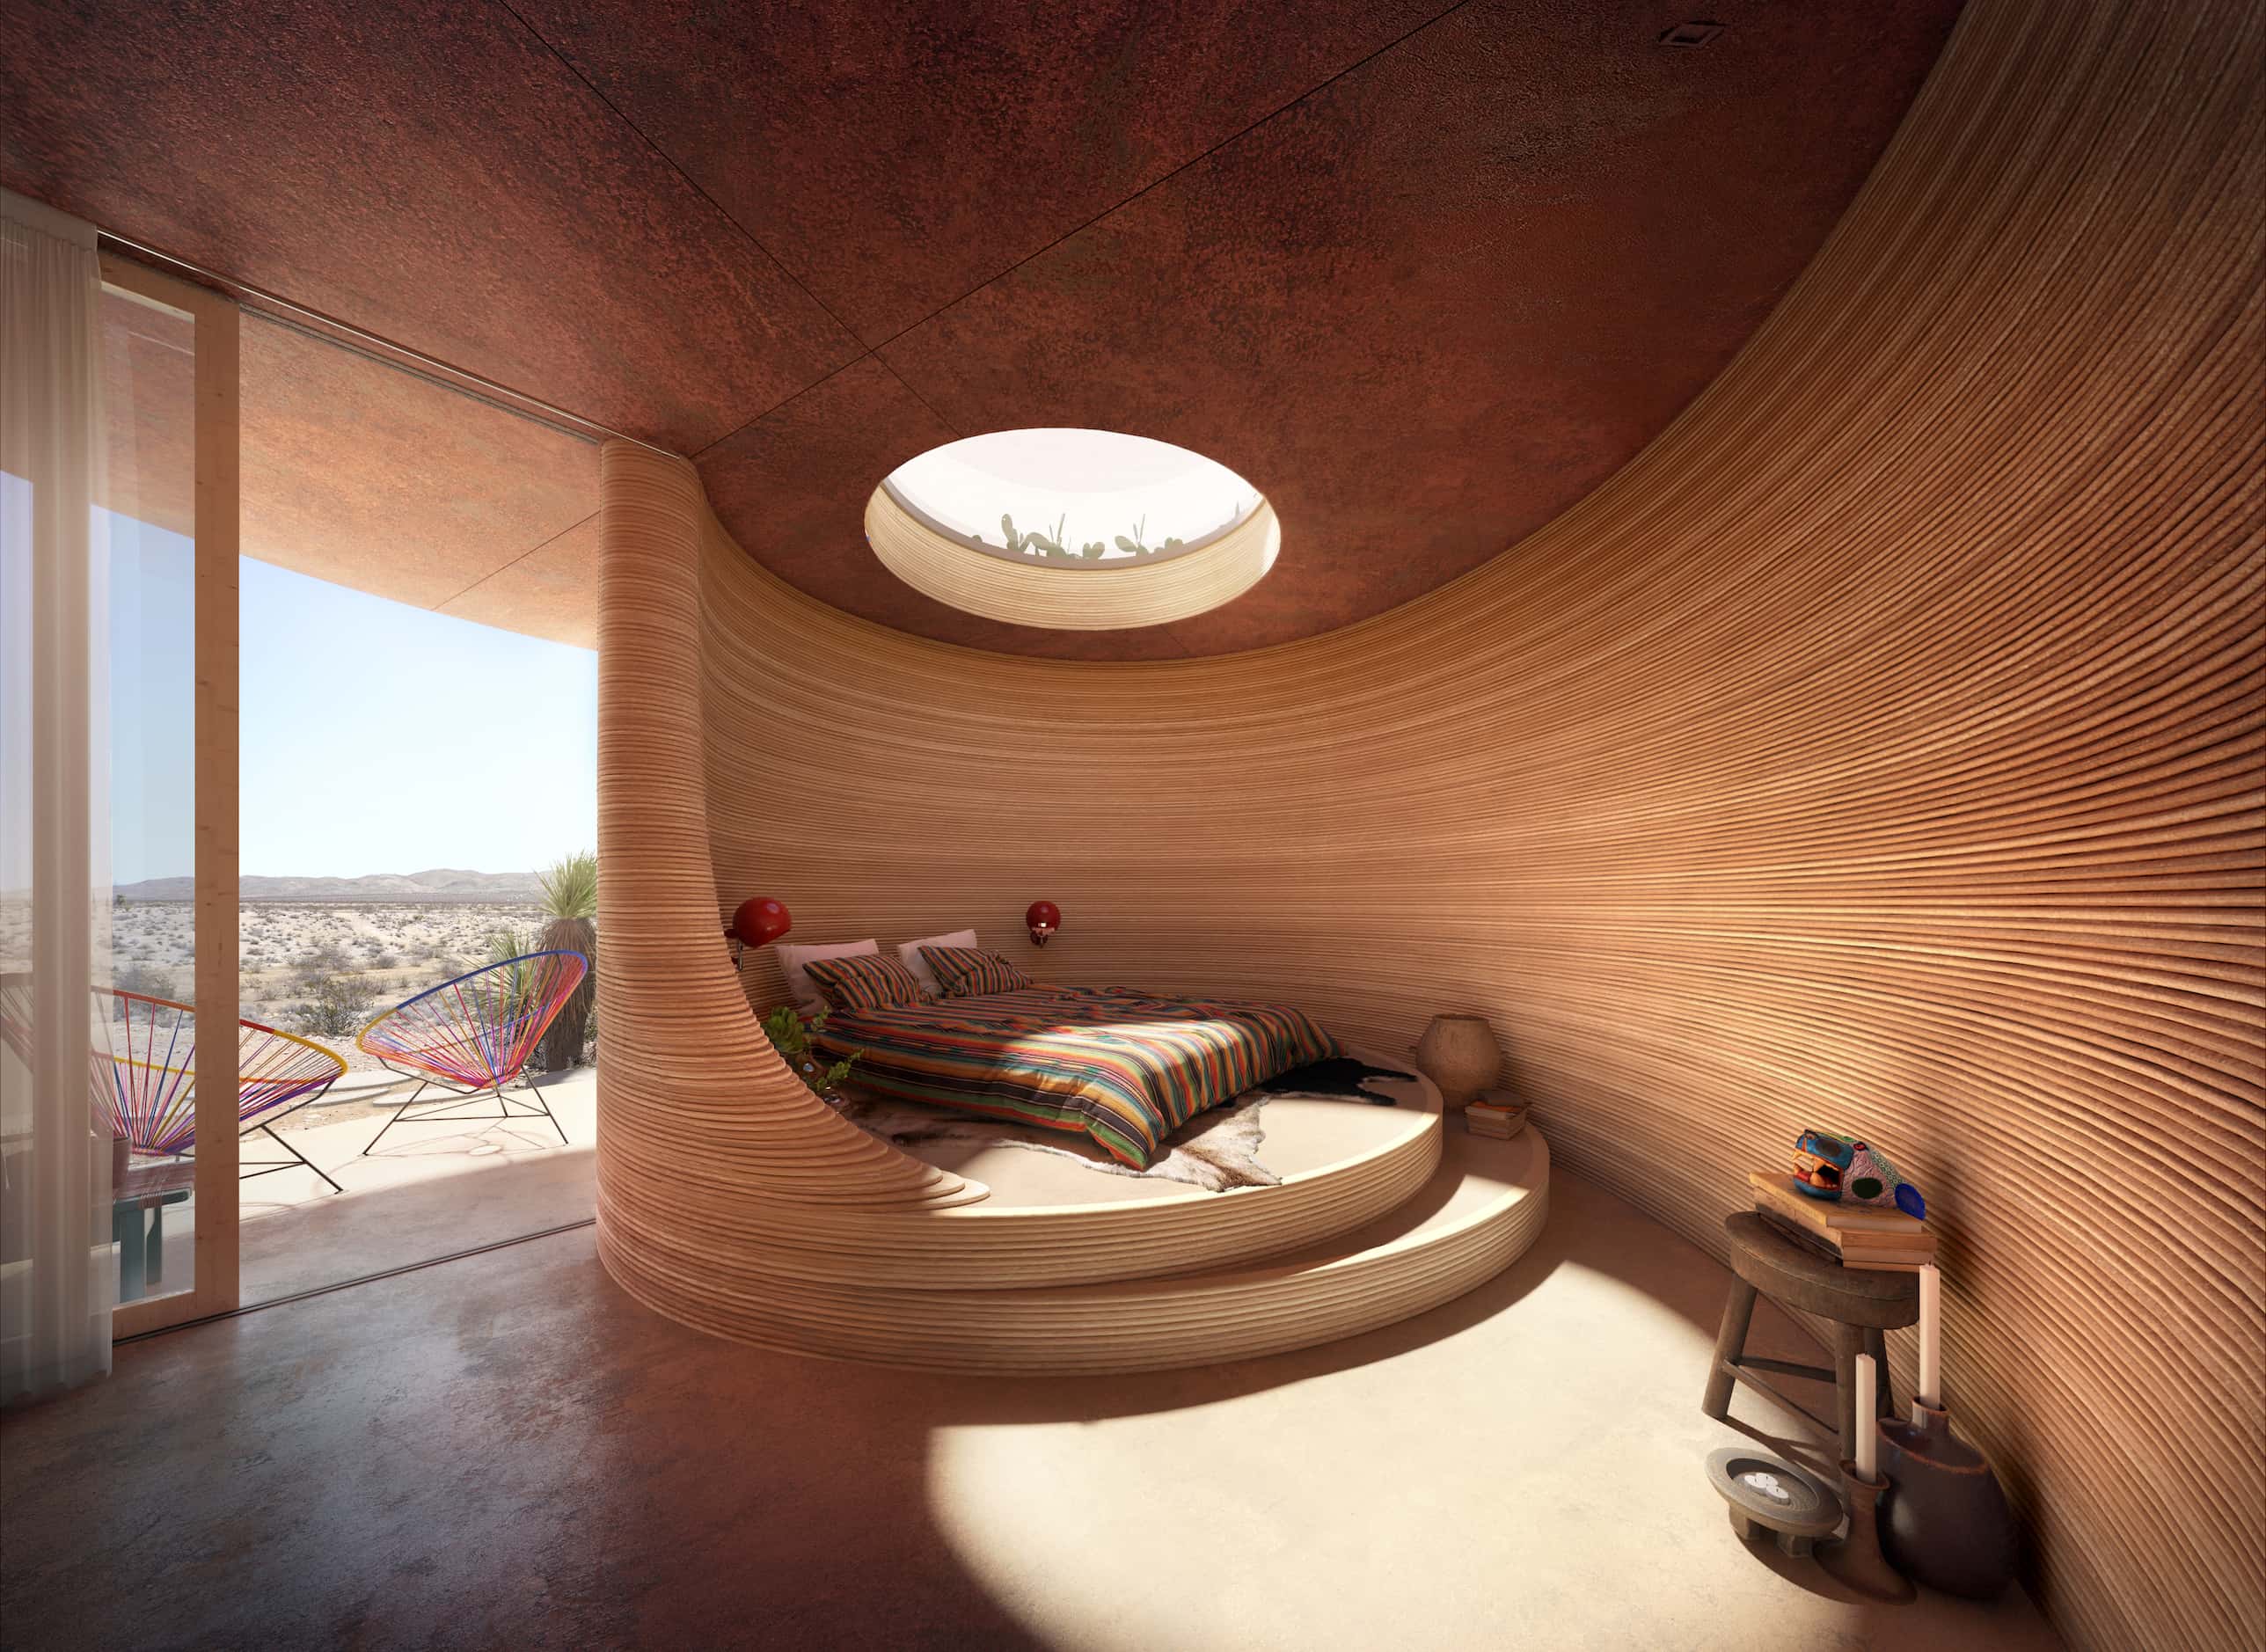 The 3D-printed technology, mastered by ICON, will fill the new spaces with soft, curved...